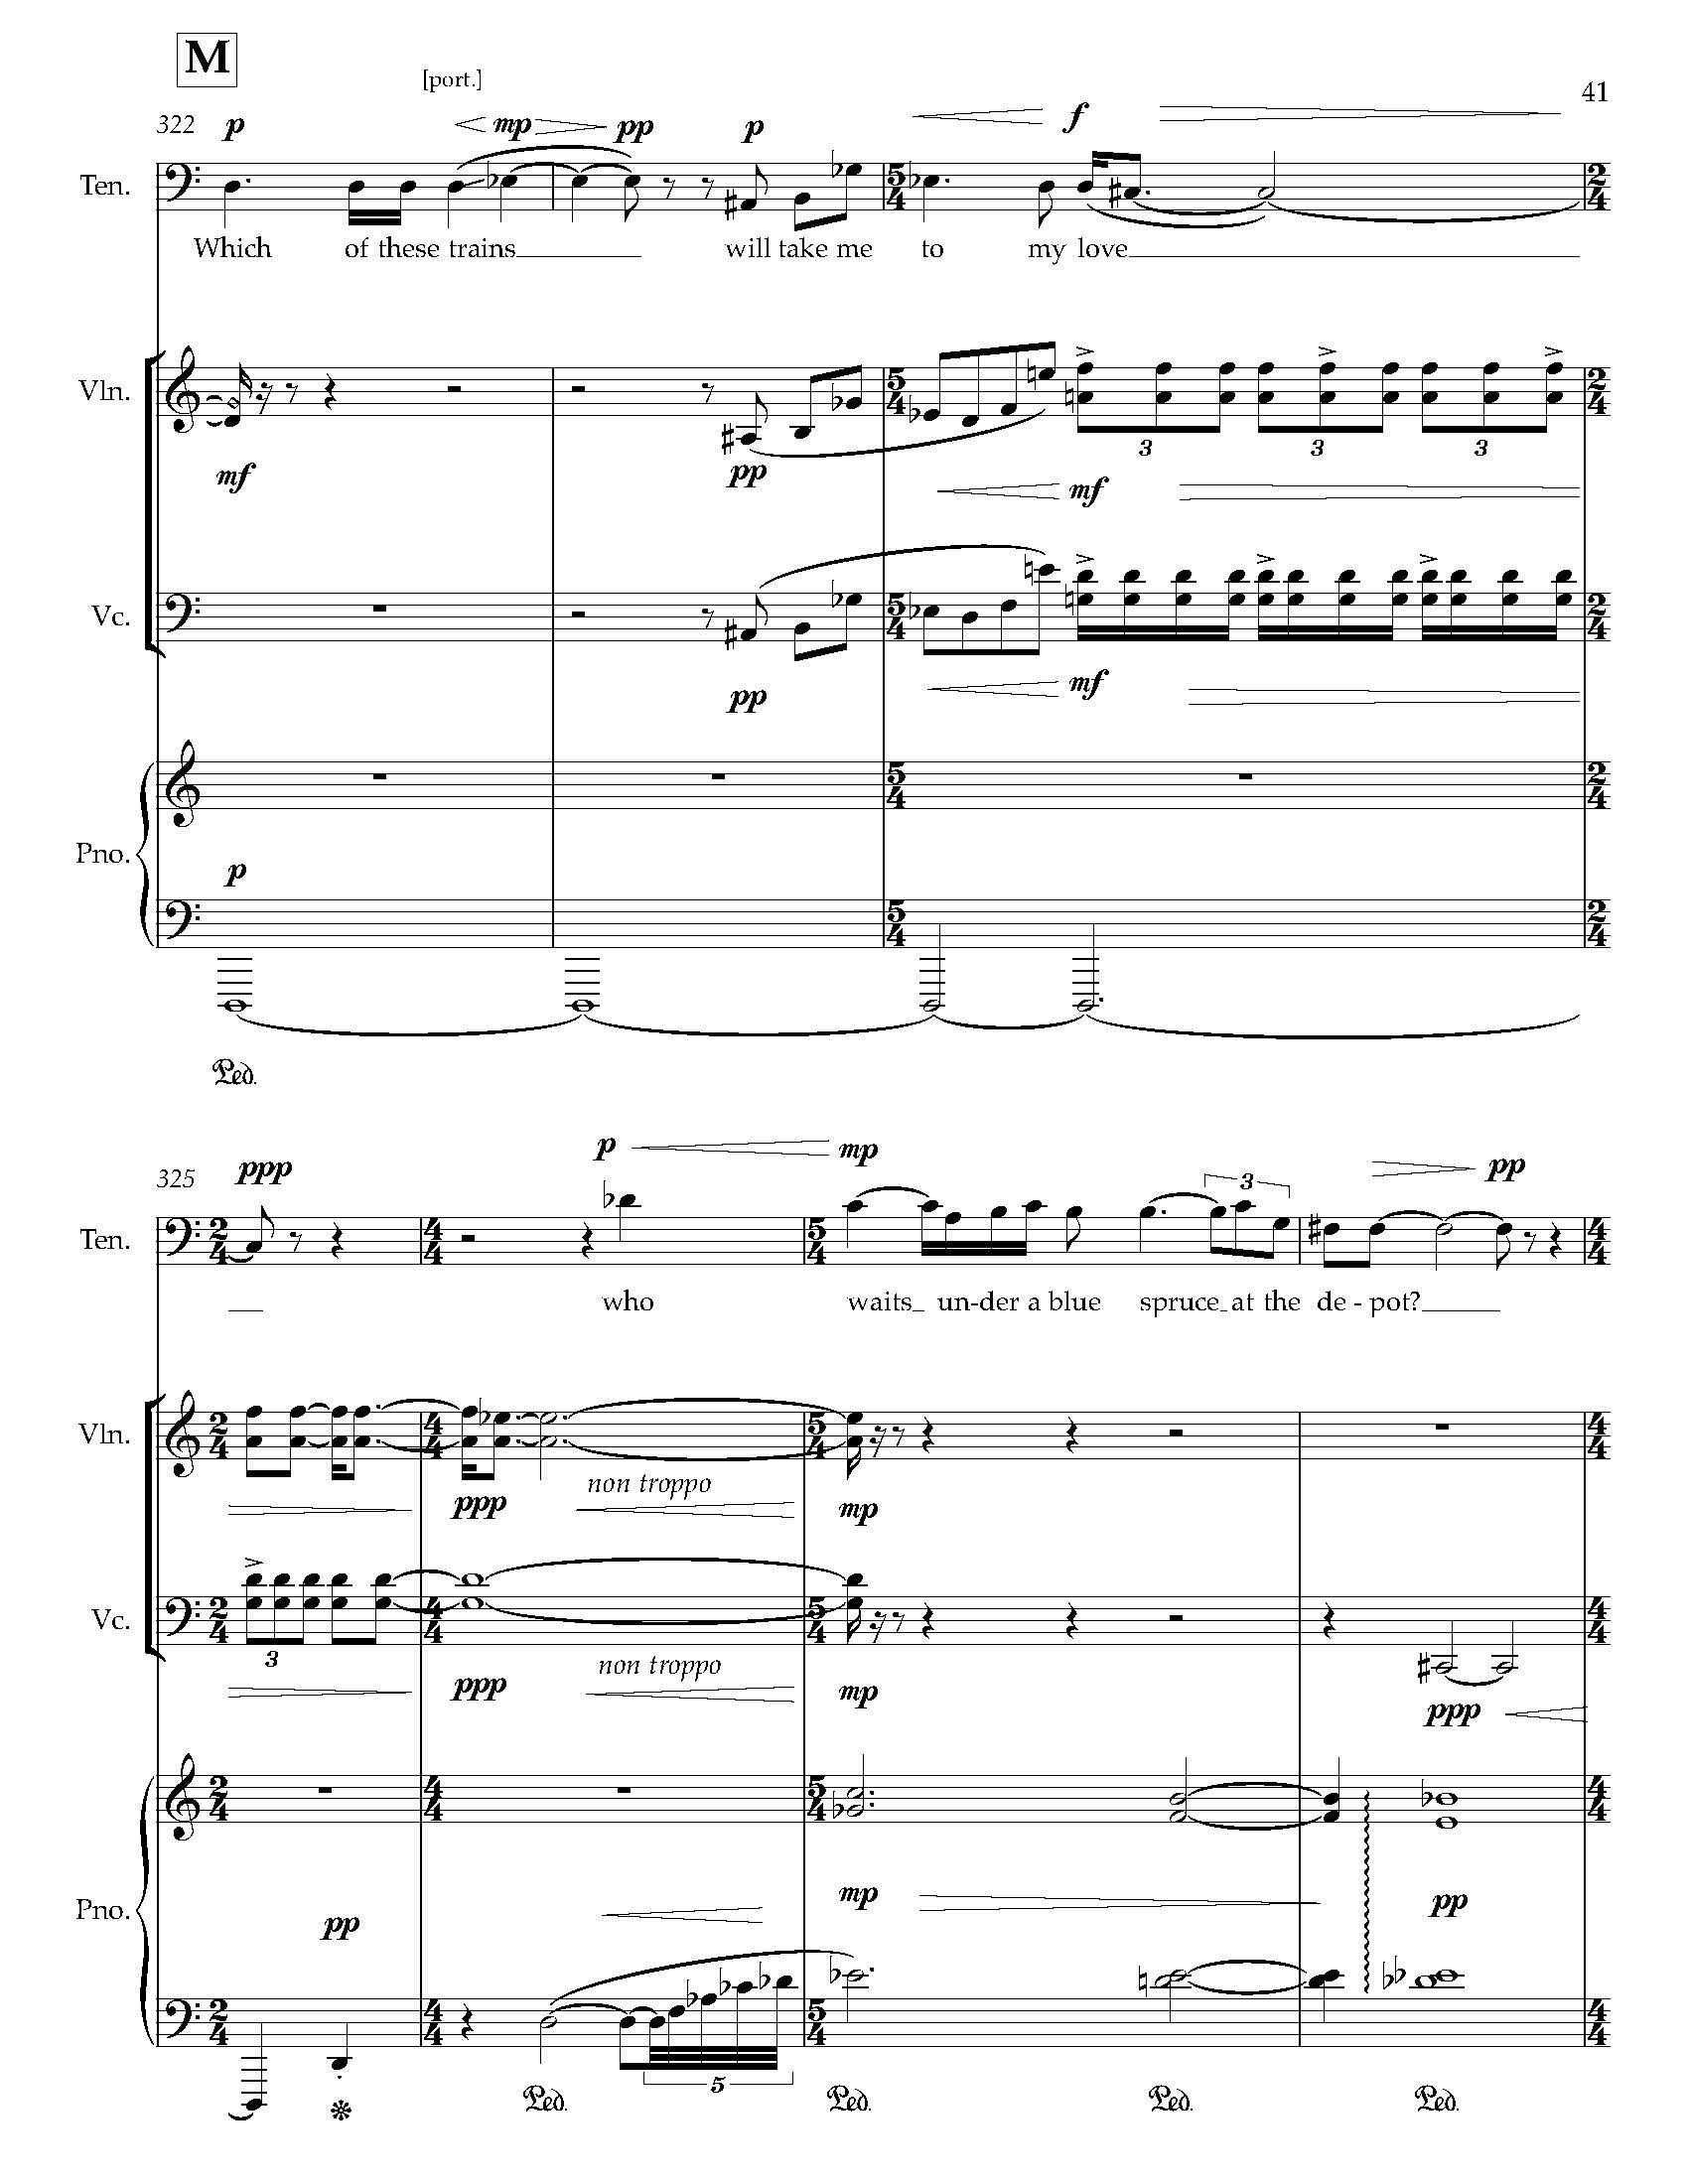 Gursky Songs - Complete Score_Page_49.jpg